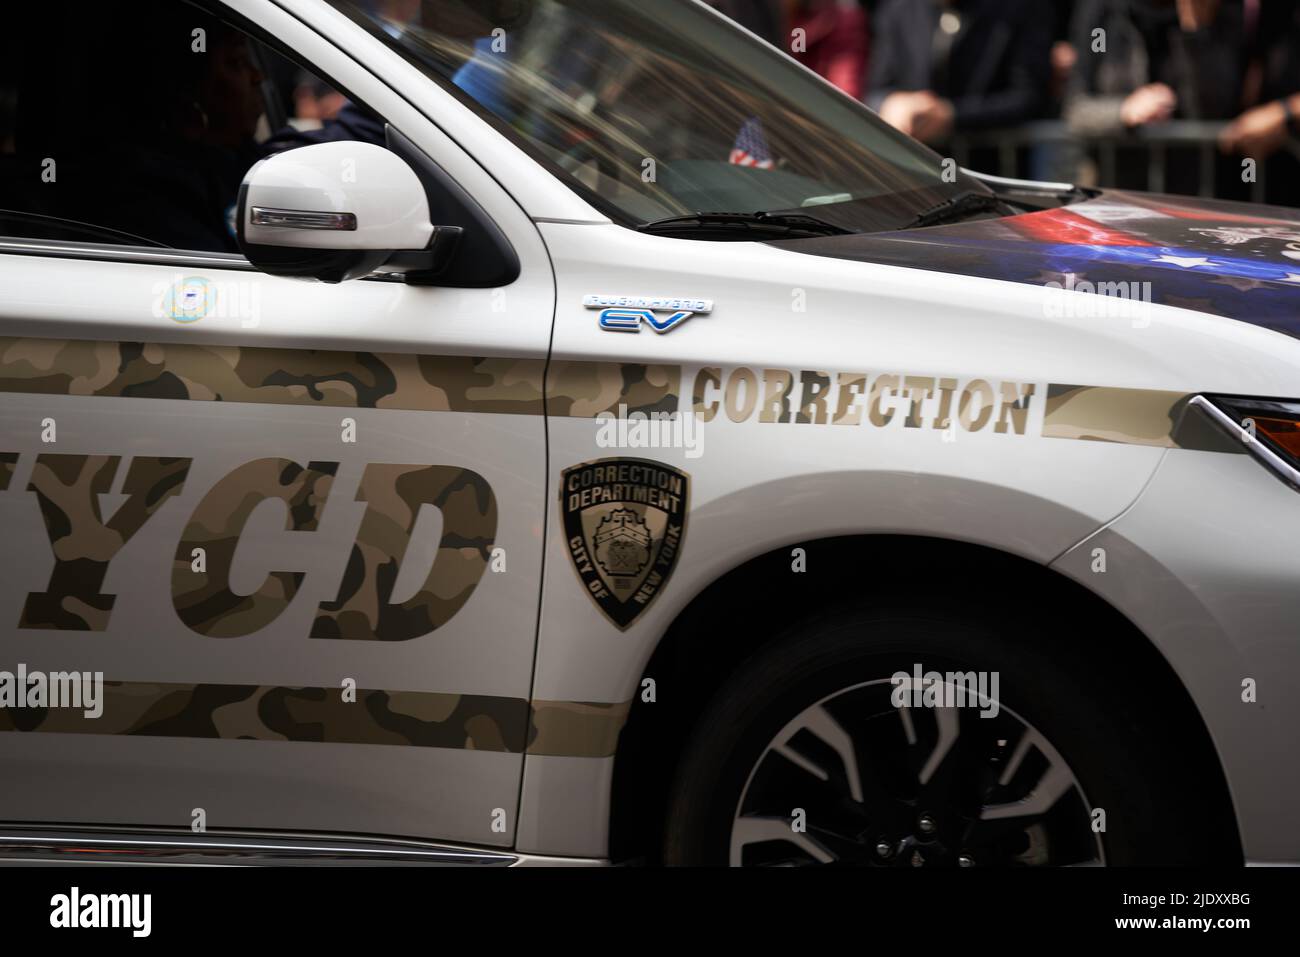 Manhattan, USA - 11. November 2021: New York correctional department vehicle. Veterans day parade in NYC. Corrections department truck, NYCD Stock Photo